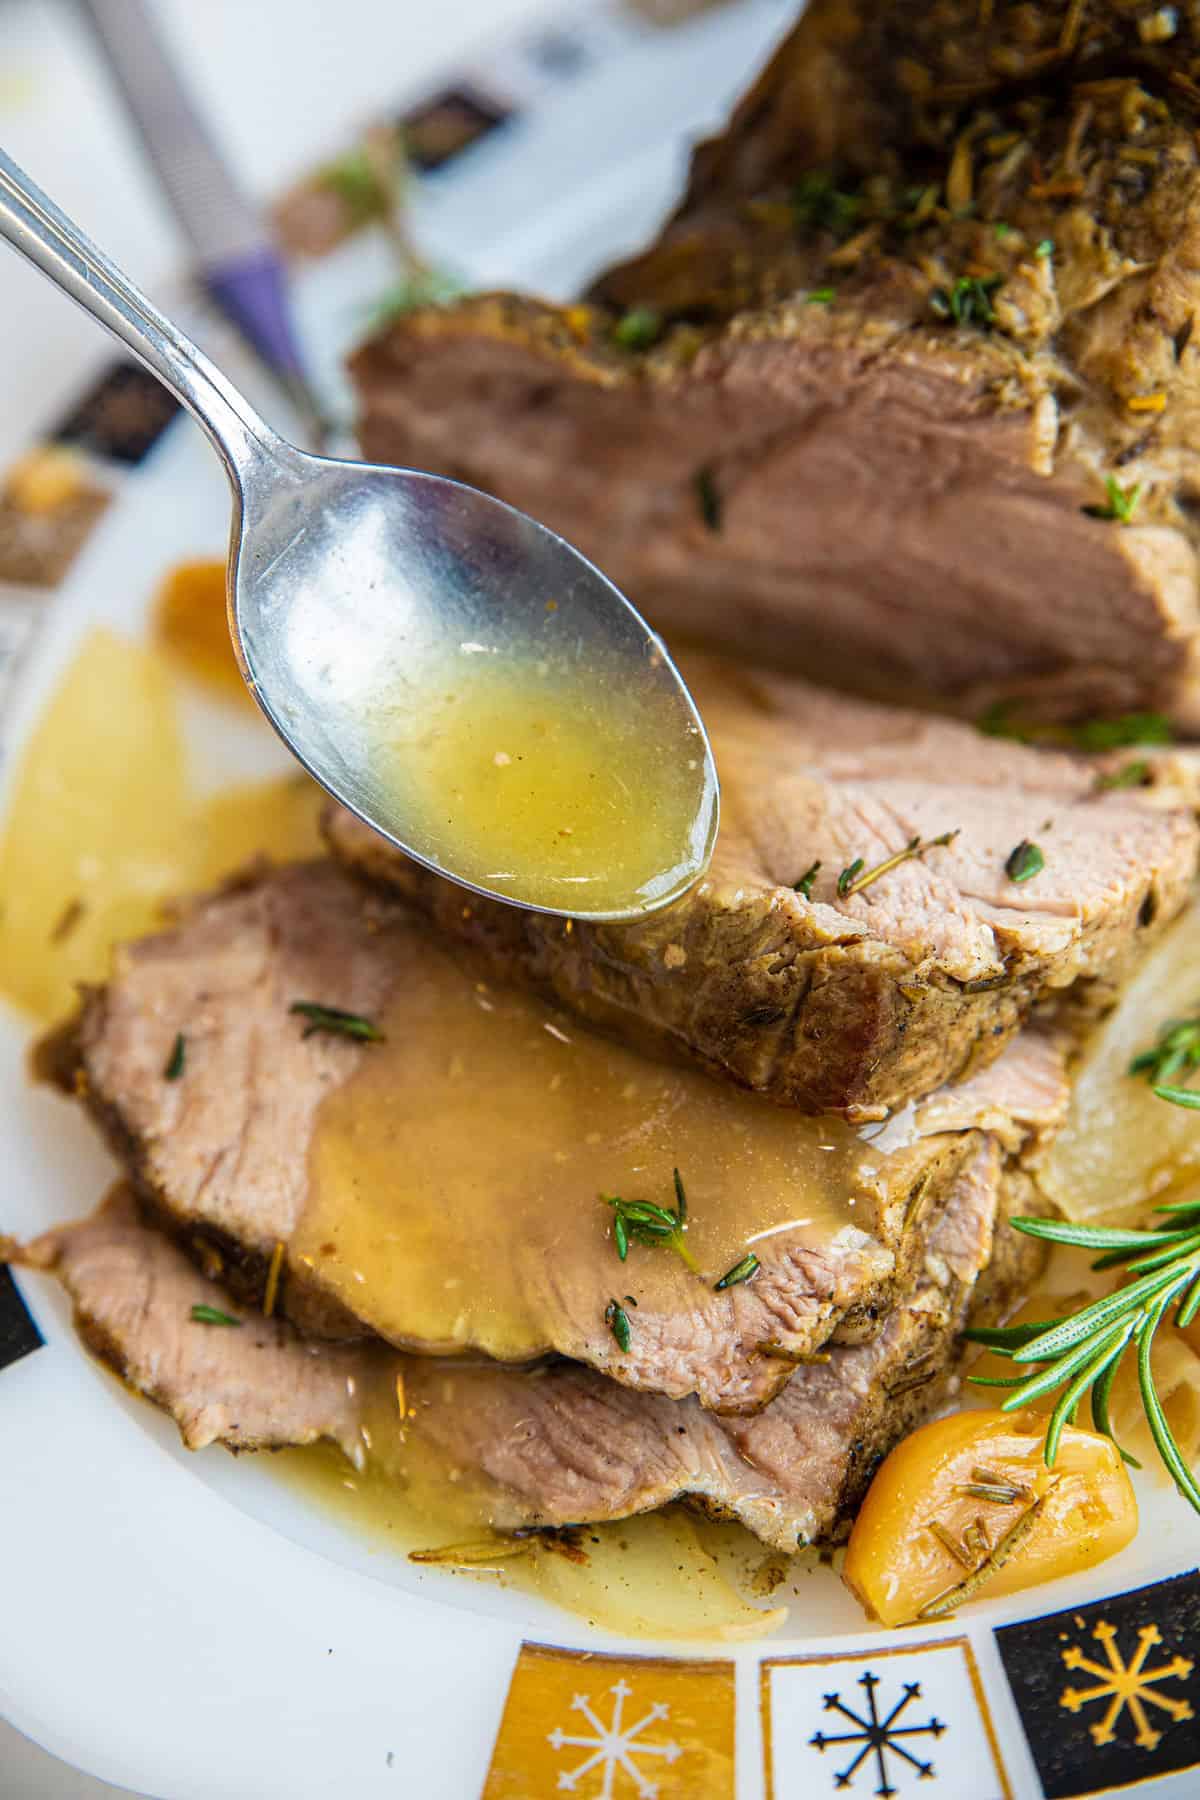 Sliced pork roast covered in juices, with a tablespoon pouring more juices over the meat.